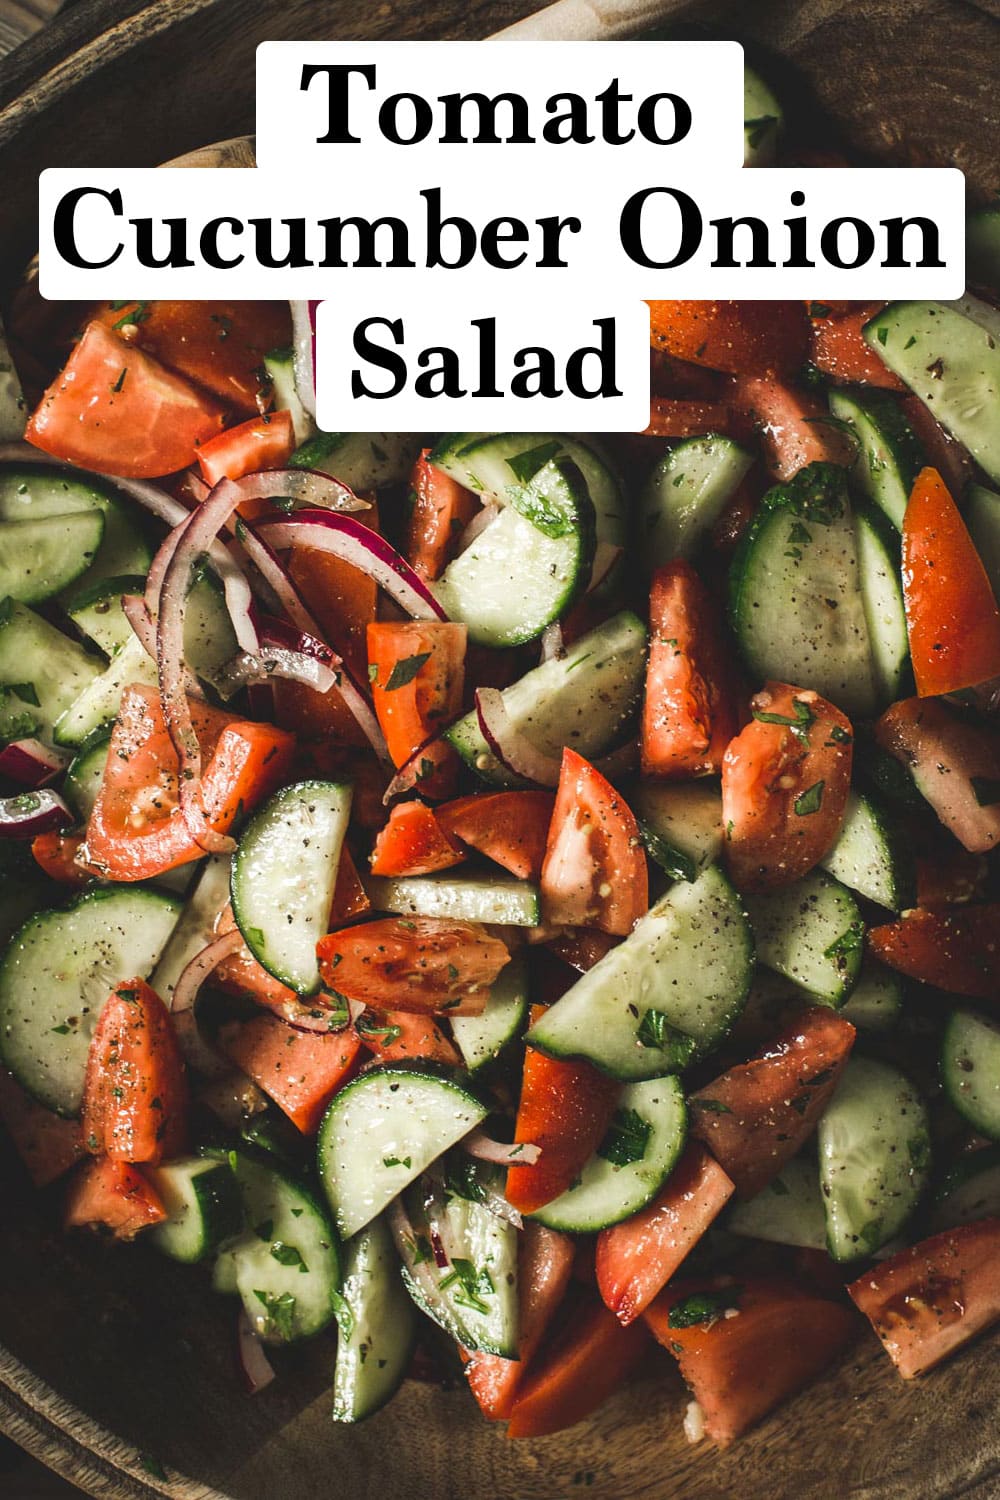 Tomato cucumber onion salad in a wooden bowl.